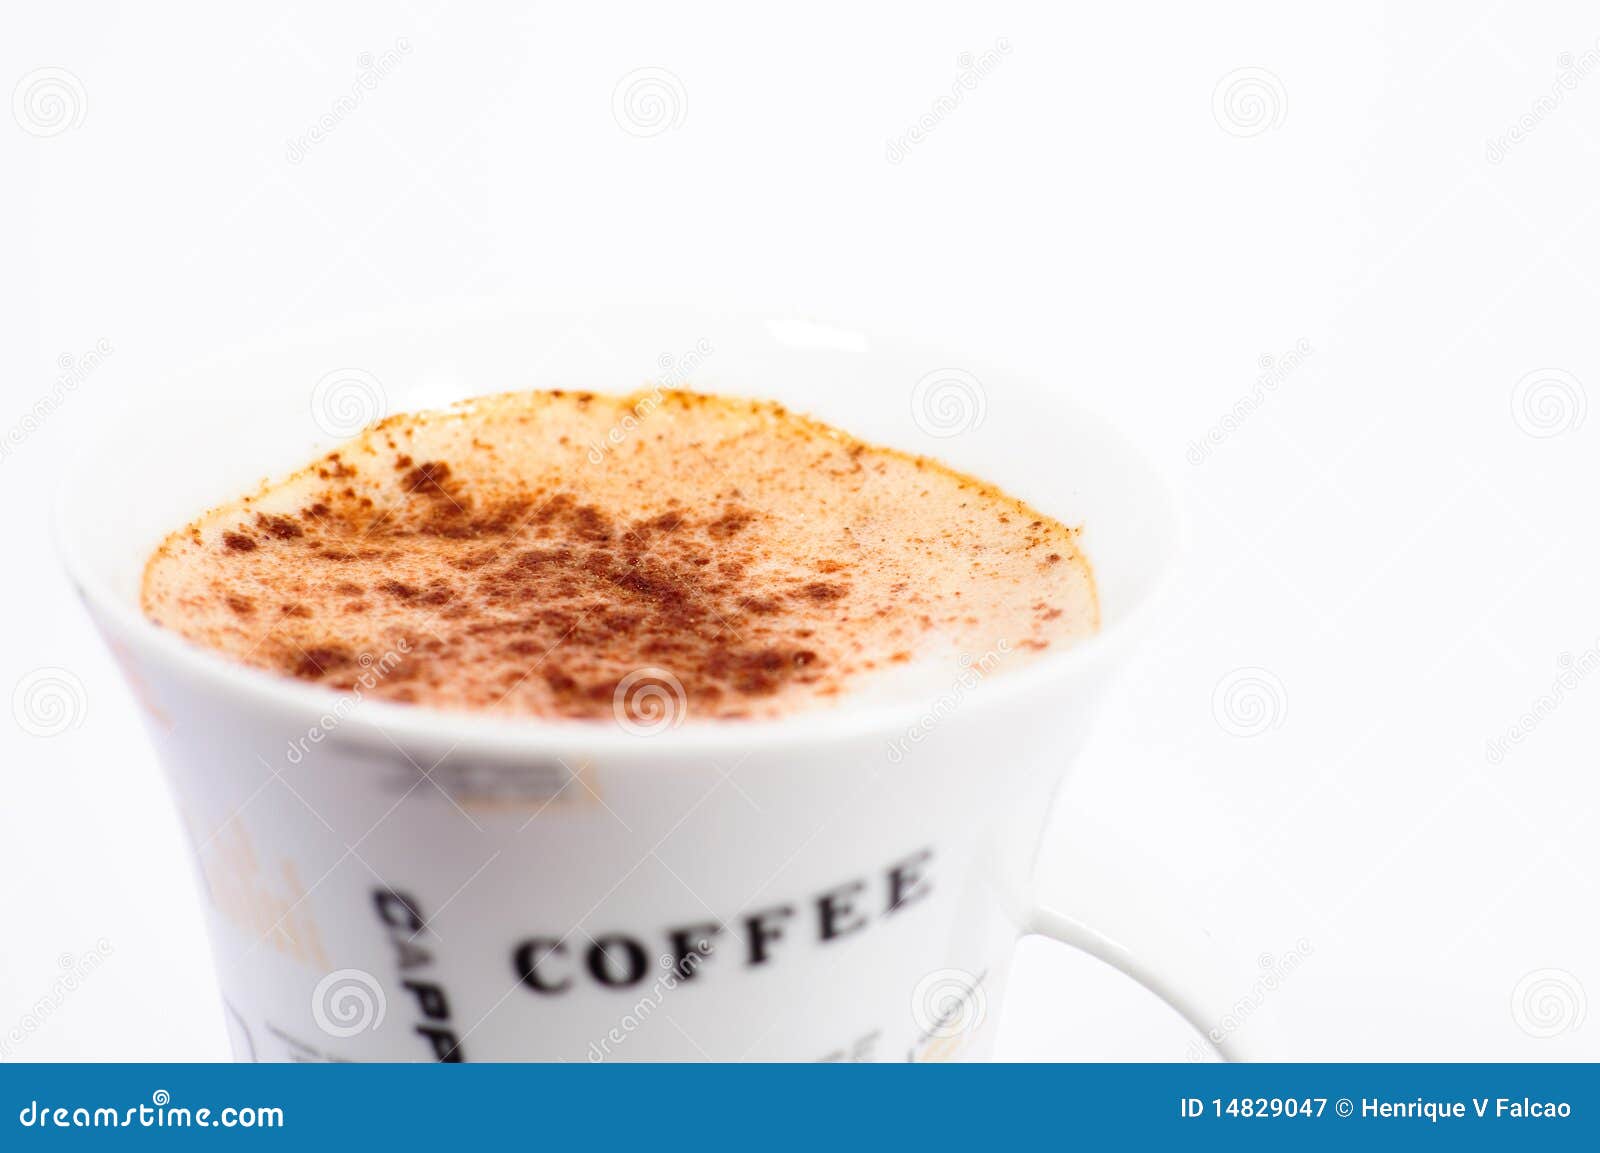 capuccino cup in white background 3